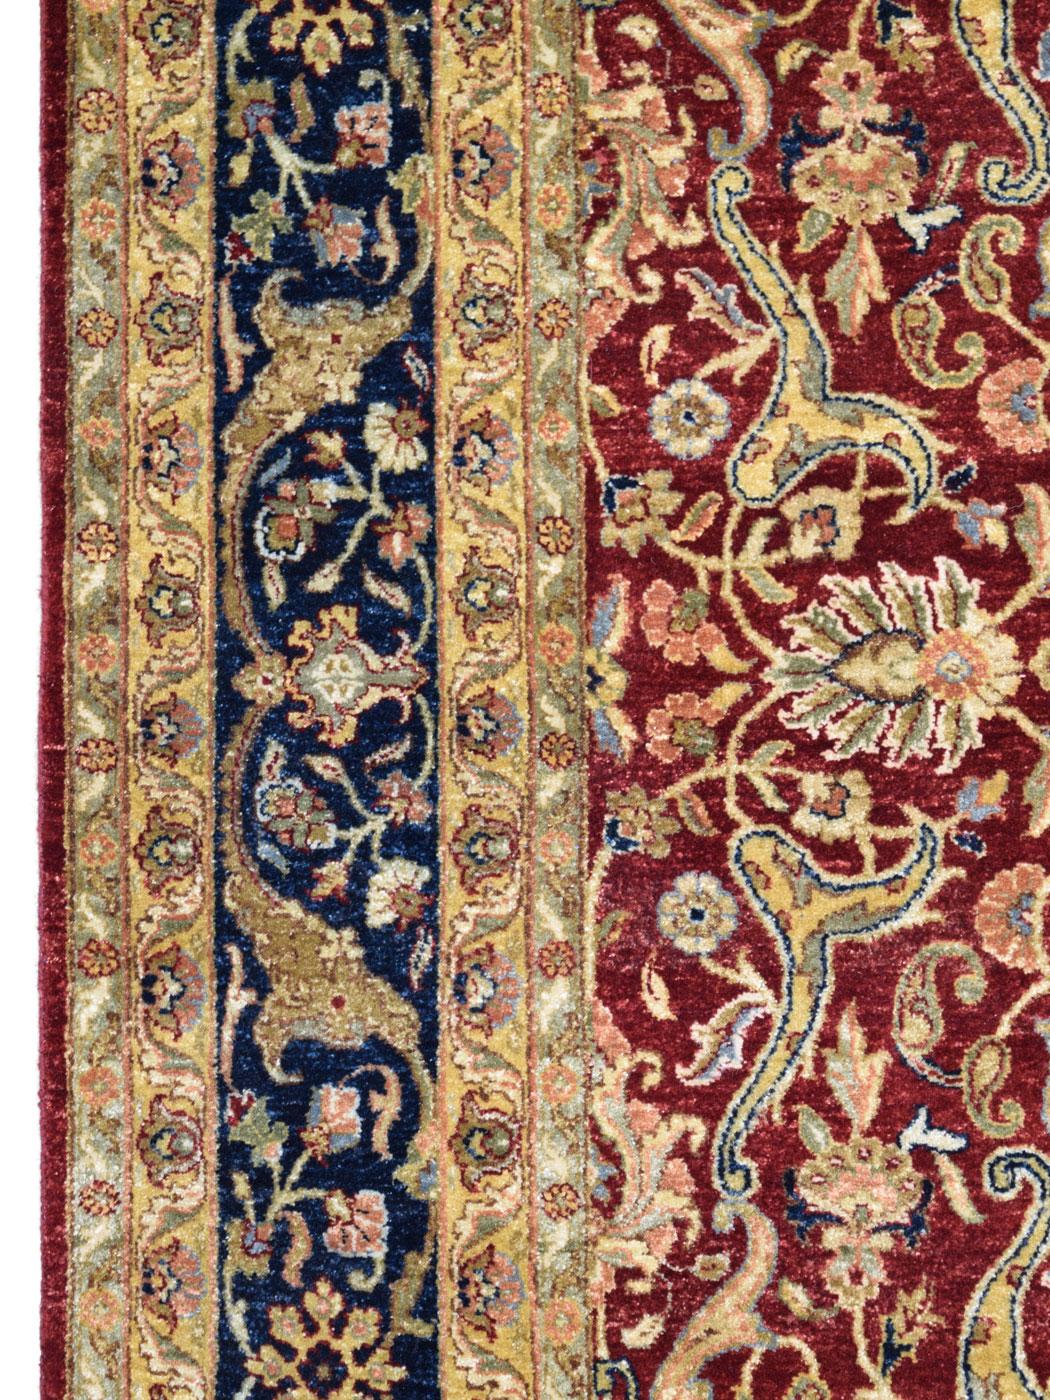 Vegetable Dyed Romantic Red, Taupe, and Indigo Hand Knotted Wool Lavar Carpet, 6' x 9' For Sale